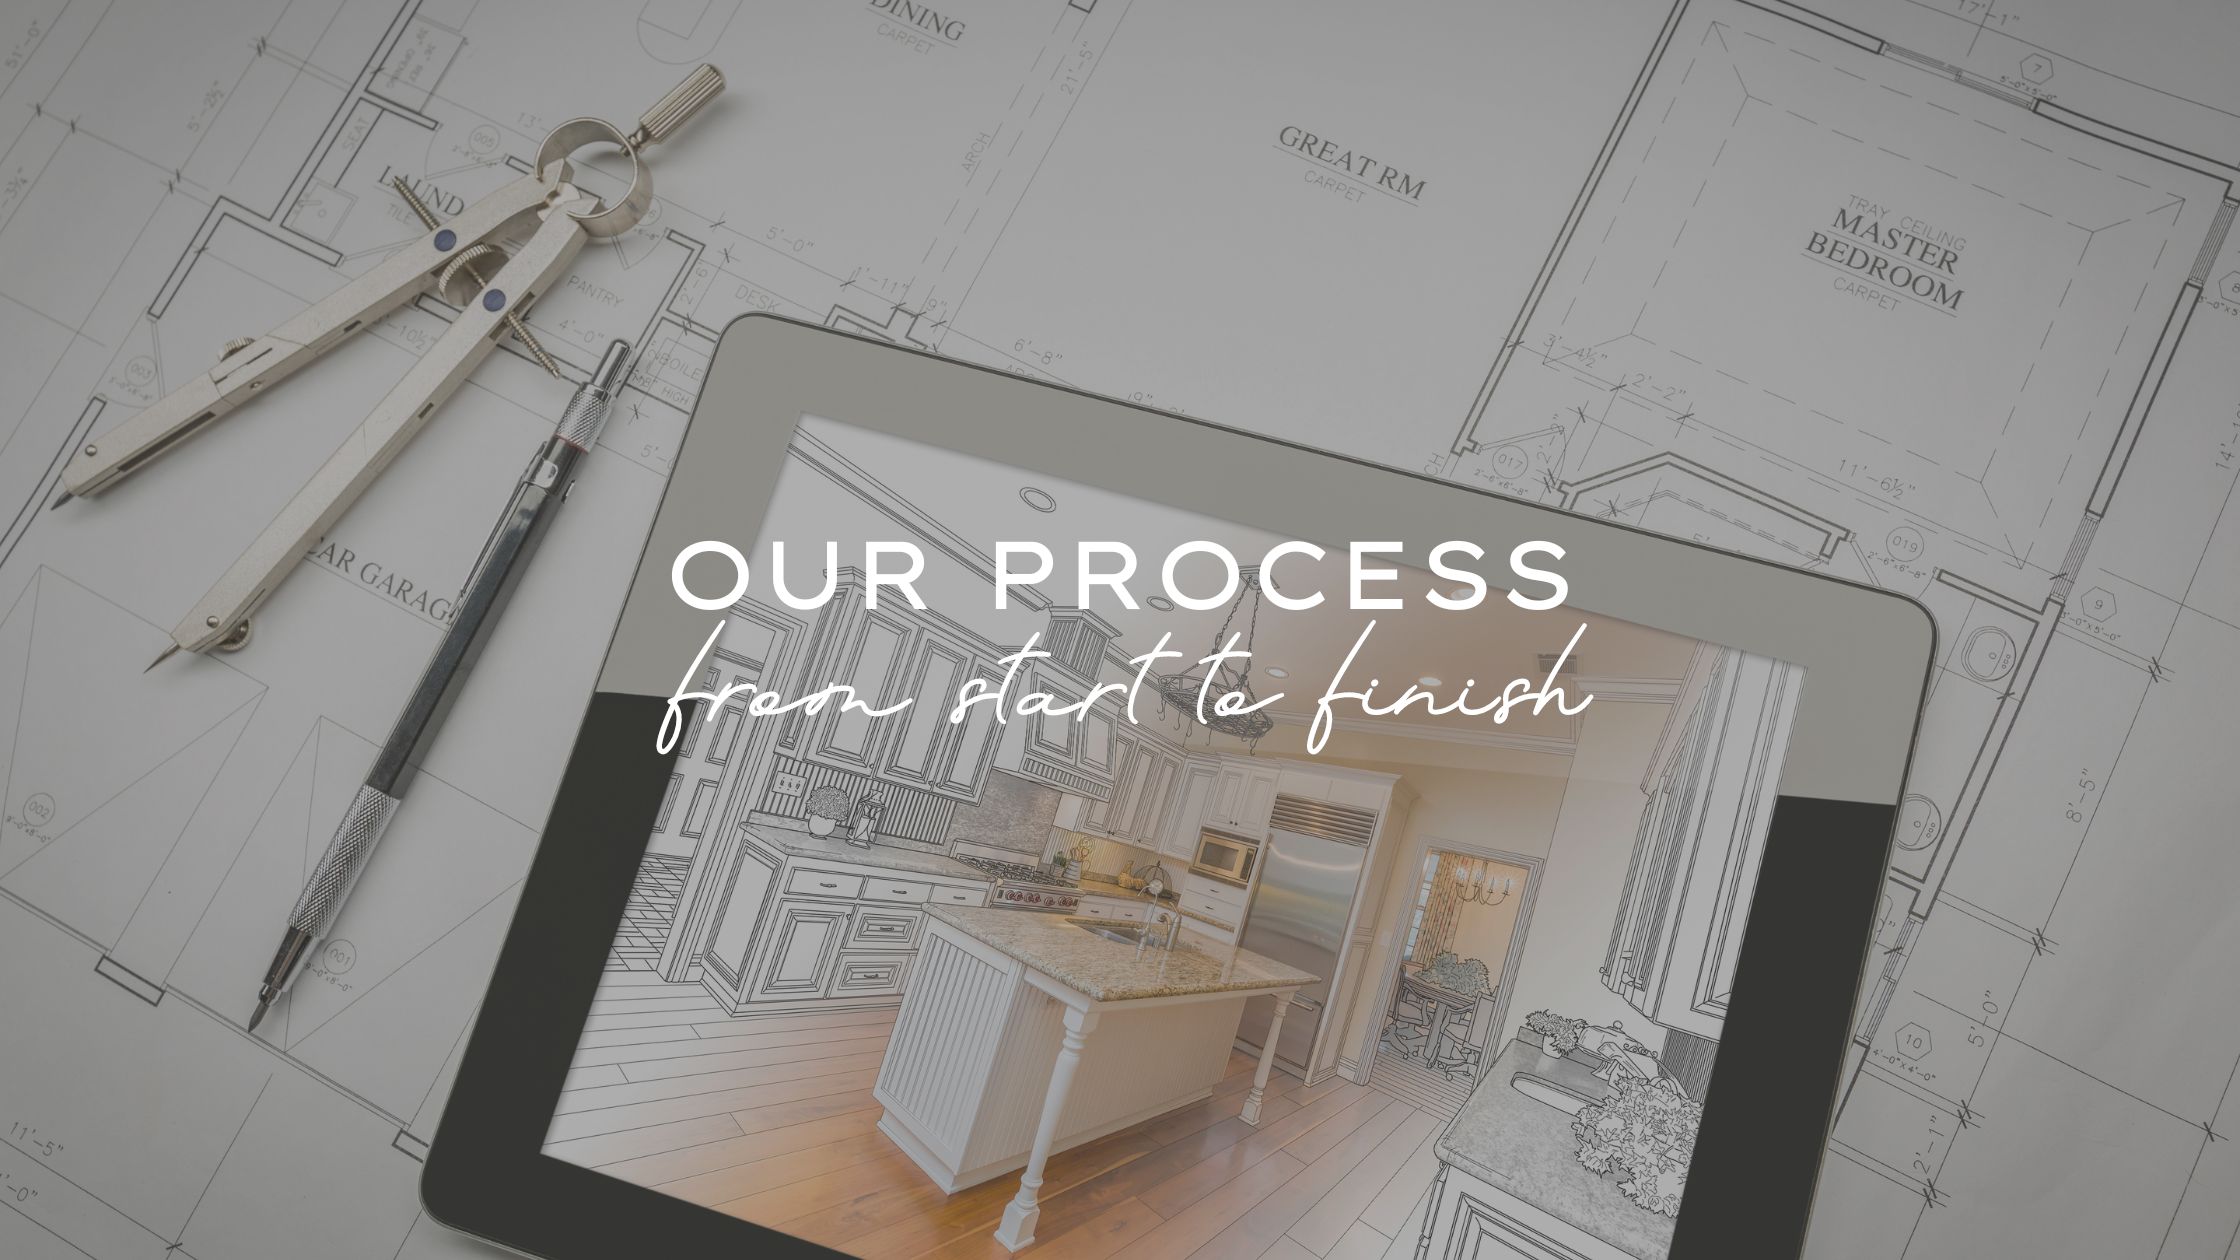 Our process from start to finish on your remodeling project.